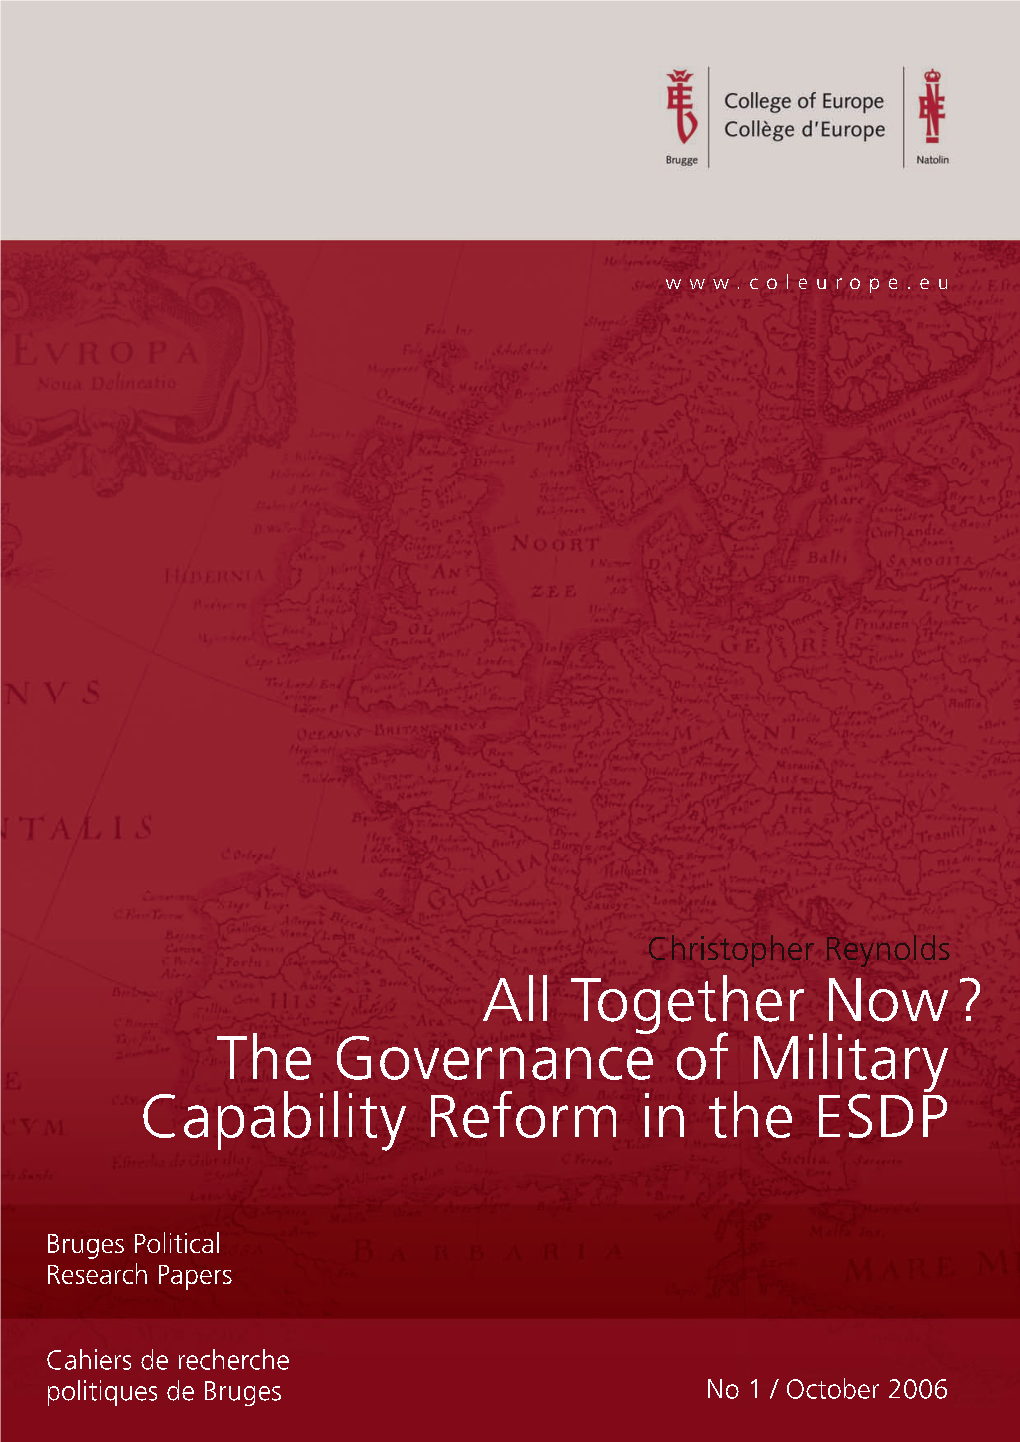 The Governance of Military Capability Reform in the ESDP